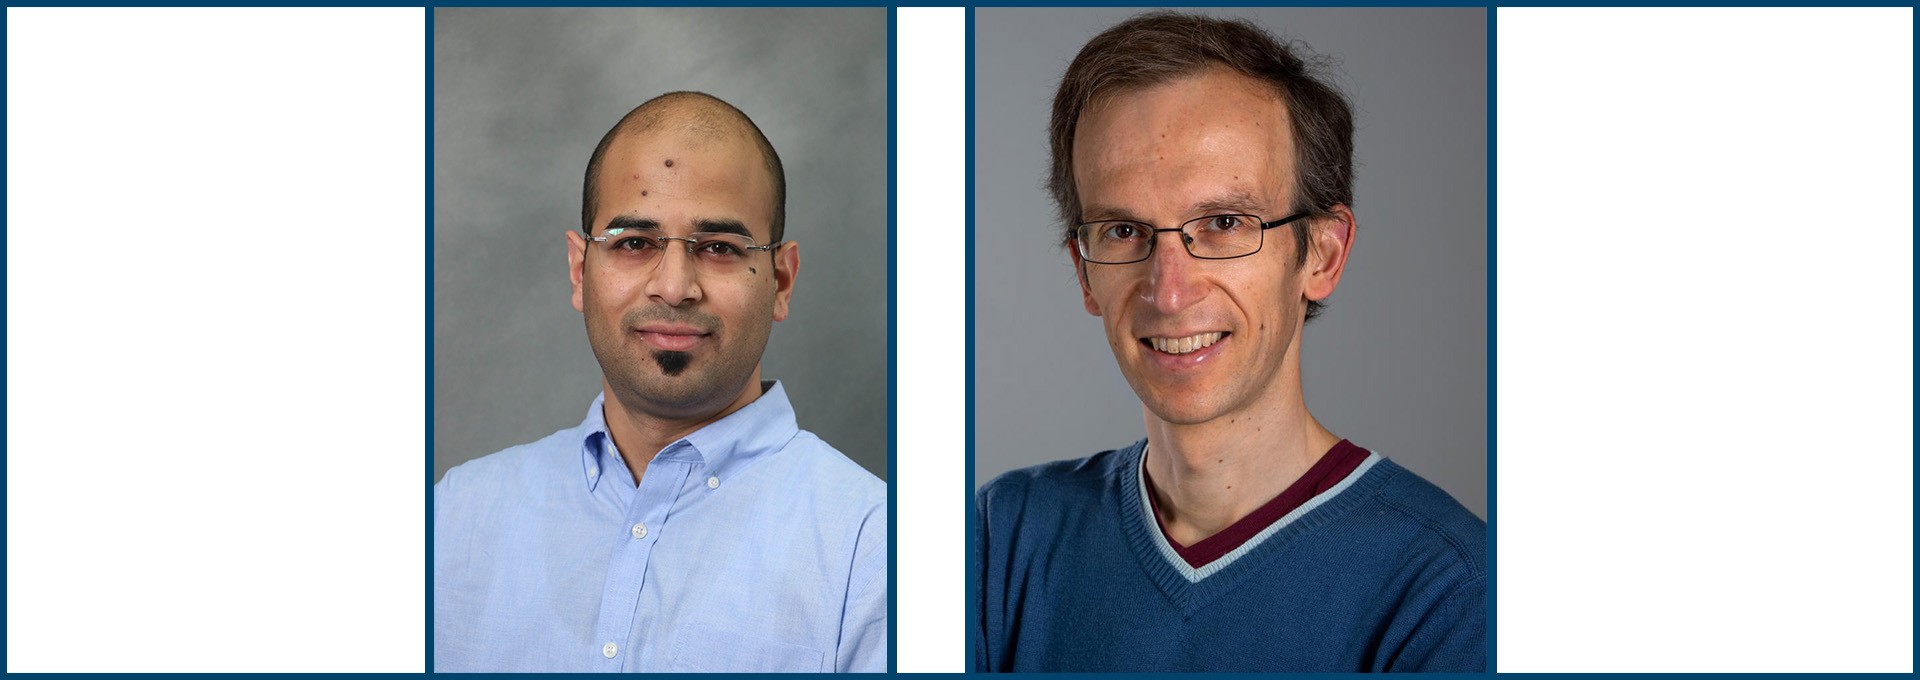 Nikhil Desai and Sébastien Michelin awarded for their research on microswimmers